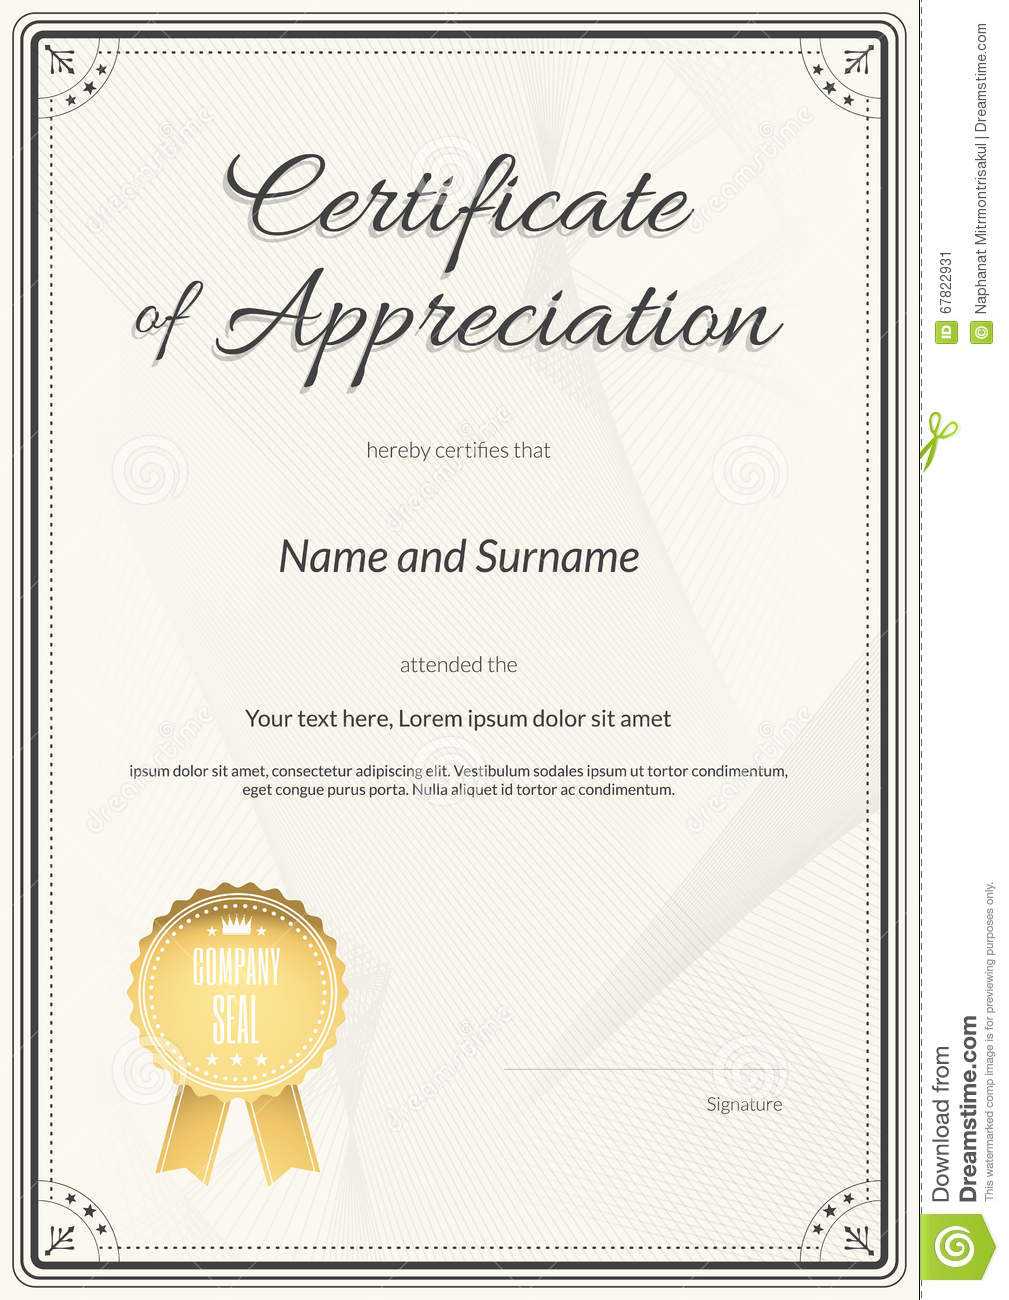 Certificate Of Appreciation Template In Vector Stock Vector Within Certificate Of Excellence Template Free Download